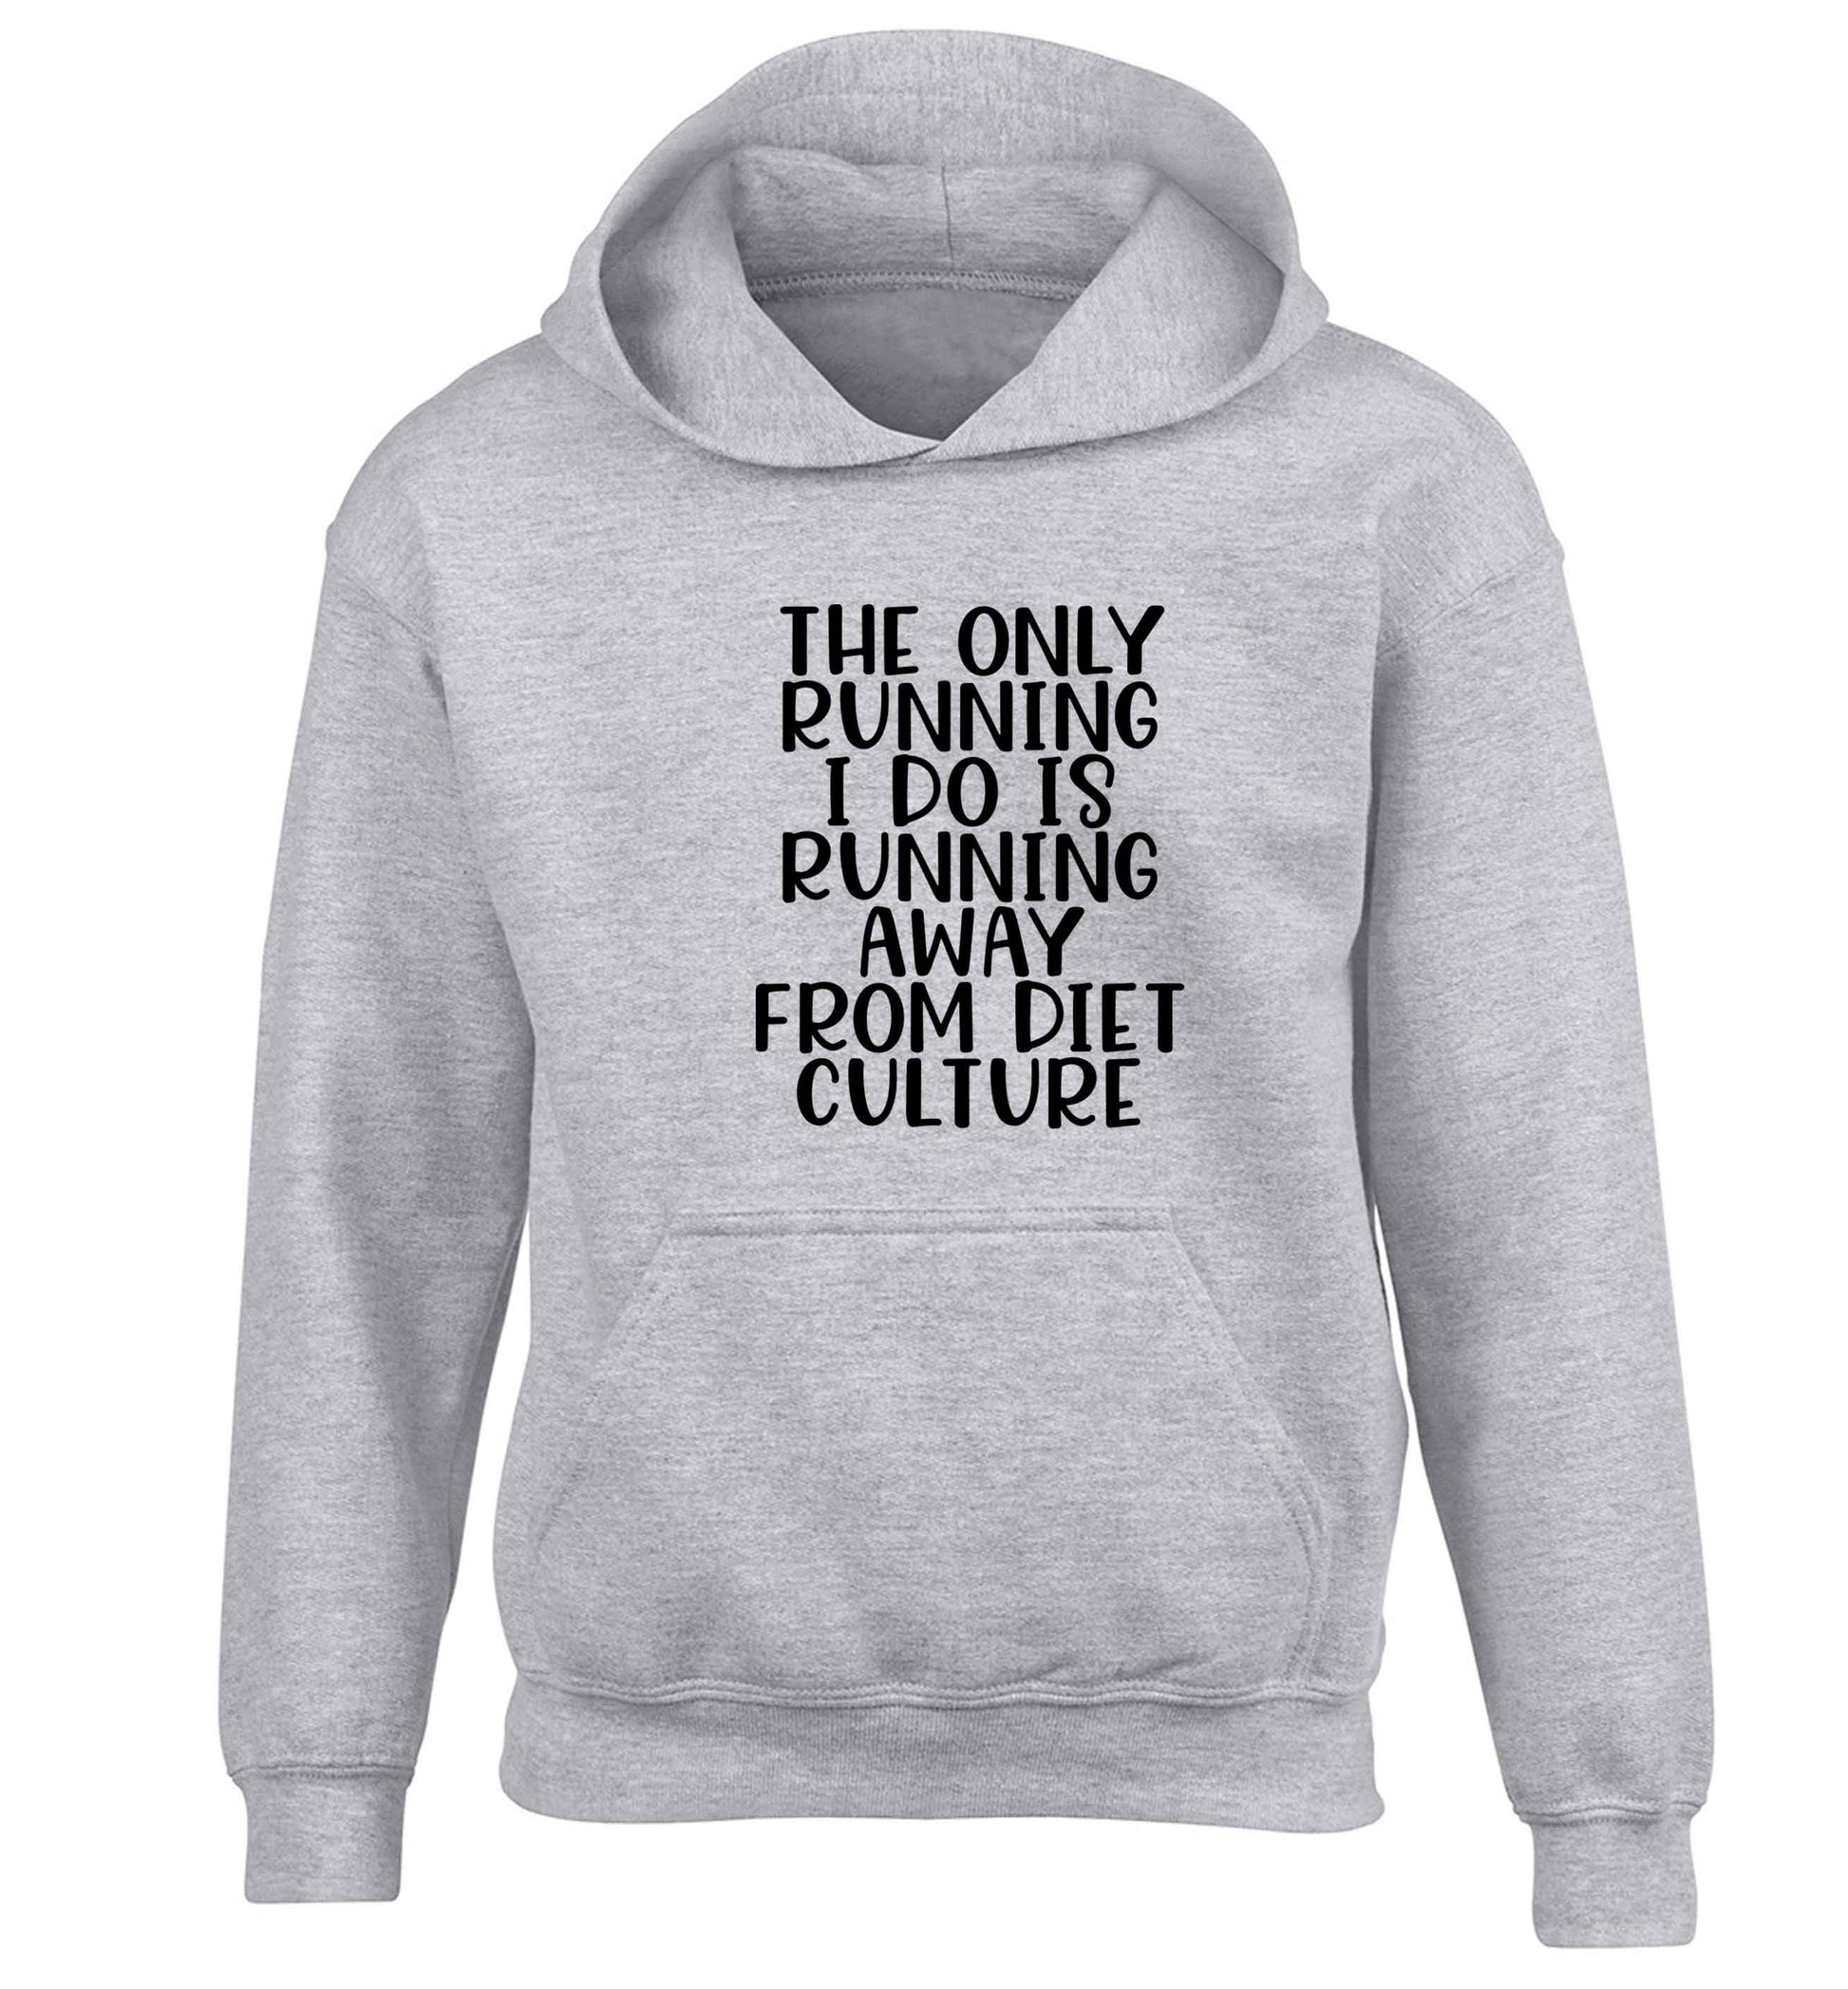 The only running I do is running away from diet culture children's grey hoodie 12-13 Years